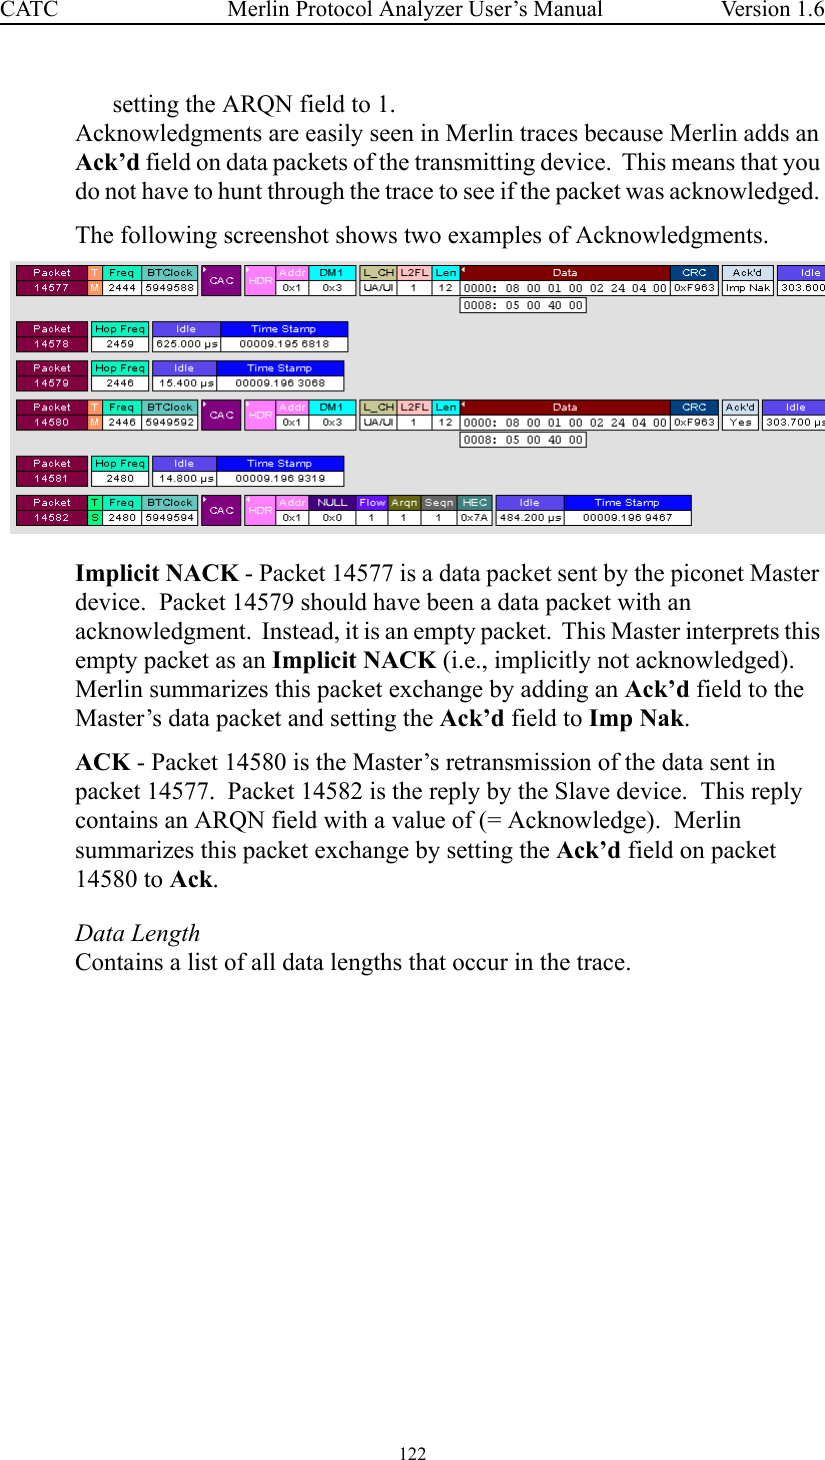 122 Merlin Protocol Analyzer User’s ManualCATC Version 1.6setting the ARQN field to 1.Acknowledgments are easily seen in Merlin traces because Merlin adds an Ack’d field on data packets of the transmitting device.  This means that you do not have to hunt through the trace to see if the packet was acknowledged. The following screenshot shows two examples of Acknowledgments.  Implicit NACK - Packet 14577 is a data packet sent by the piconet Master device.  Packet 14579 should have been a data packet with an acknowledgment.  Instead, it is an empty packet.  This Master interprets this empty packet as an Implicit NACK (i.e., implicitly not acknowledged).  Merlin summarizes this packet exchange by adding an Ack’d field to the Master’s data packet and setting the Ack’d field to Imp Nak.ACK - Packet 14580 is the Master’s retransmission of the data sent in packet 14577.  Packet 14582 is the reply by the Slave device.  This reply contains an ARQN field with a value of (= Acknowledge).  Merlin summarizes this packet exchange by setting the Ack’d field on packet 14580 to Ack.Data LengthContains a list of all data lengths that occur in the trace.